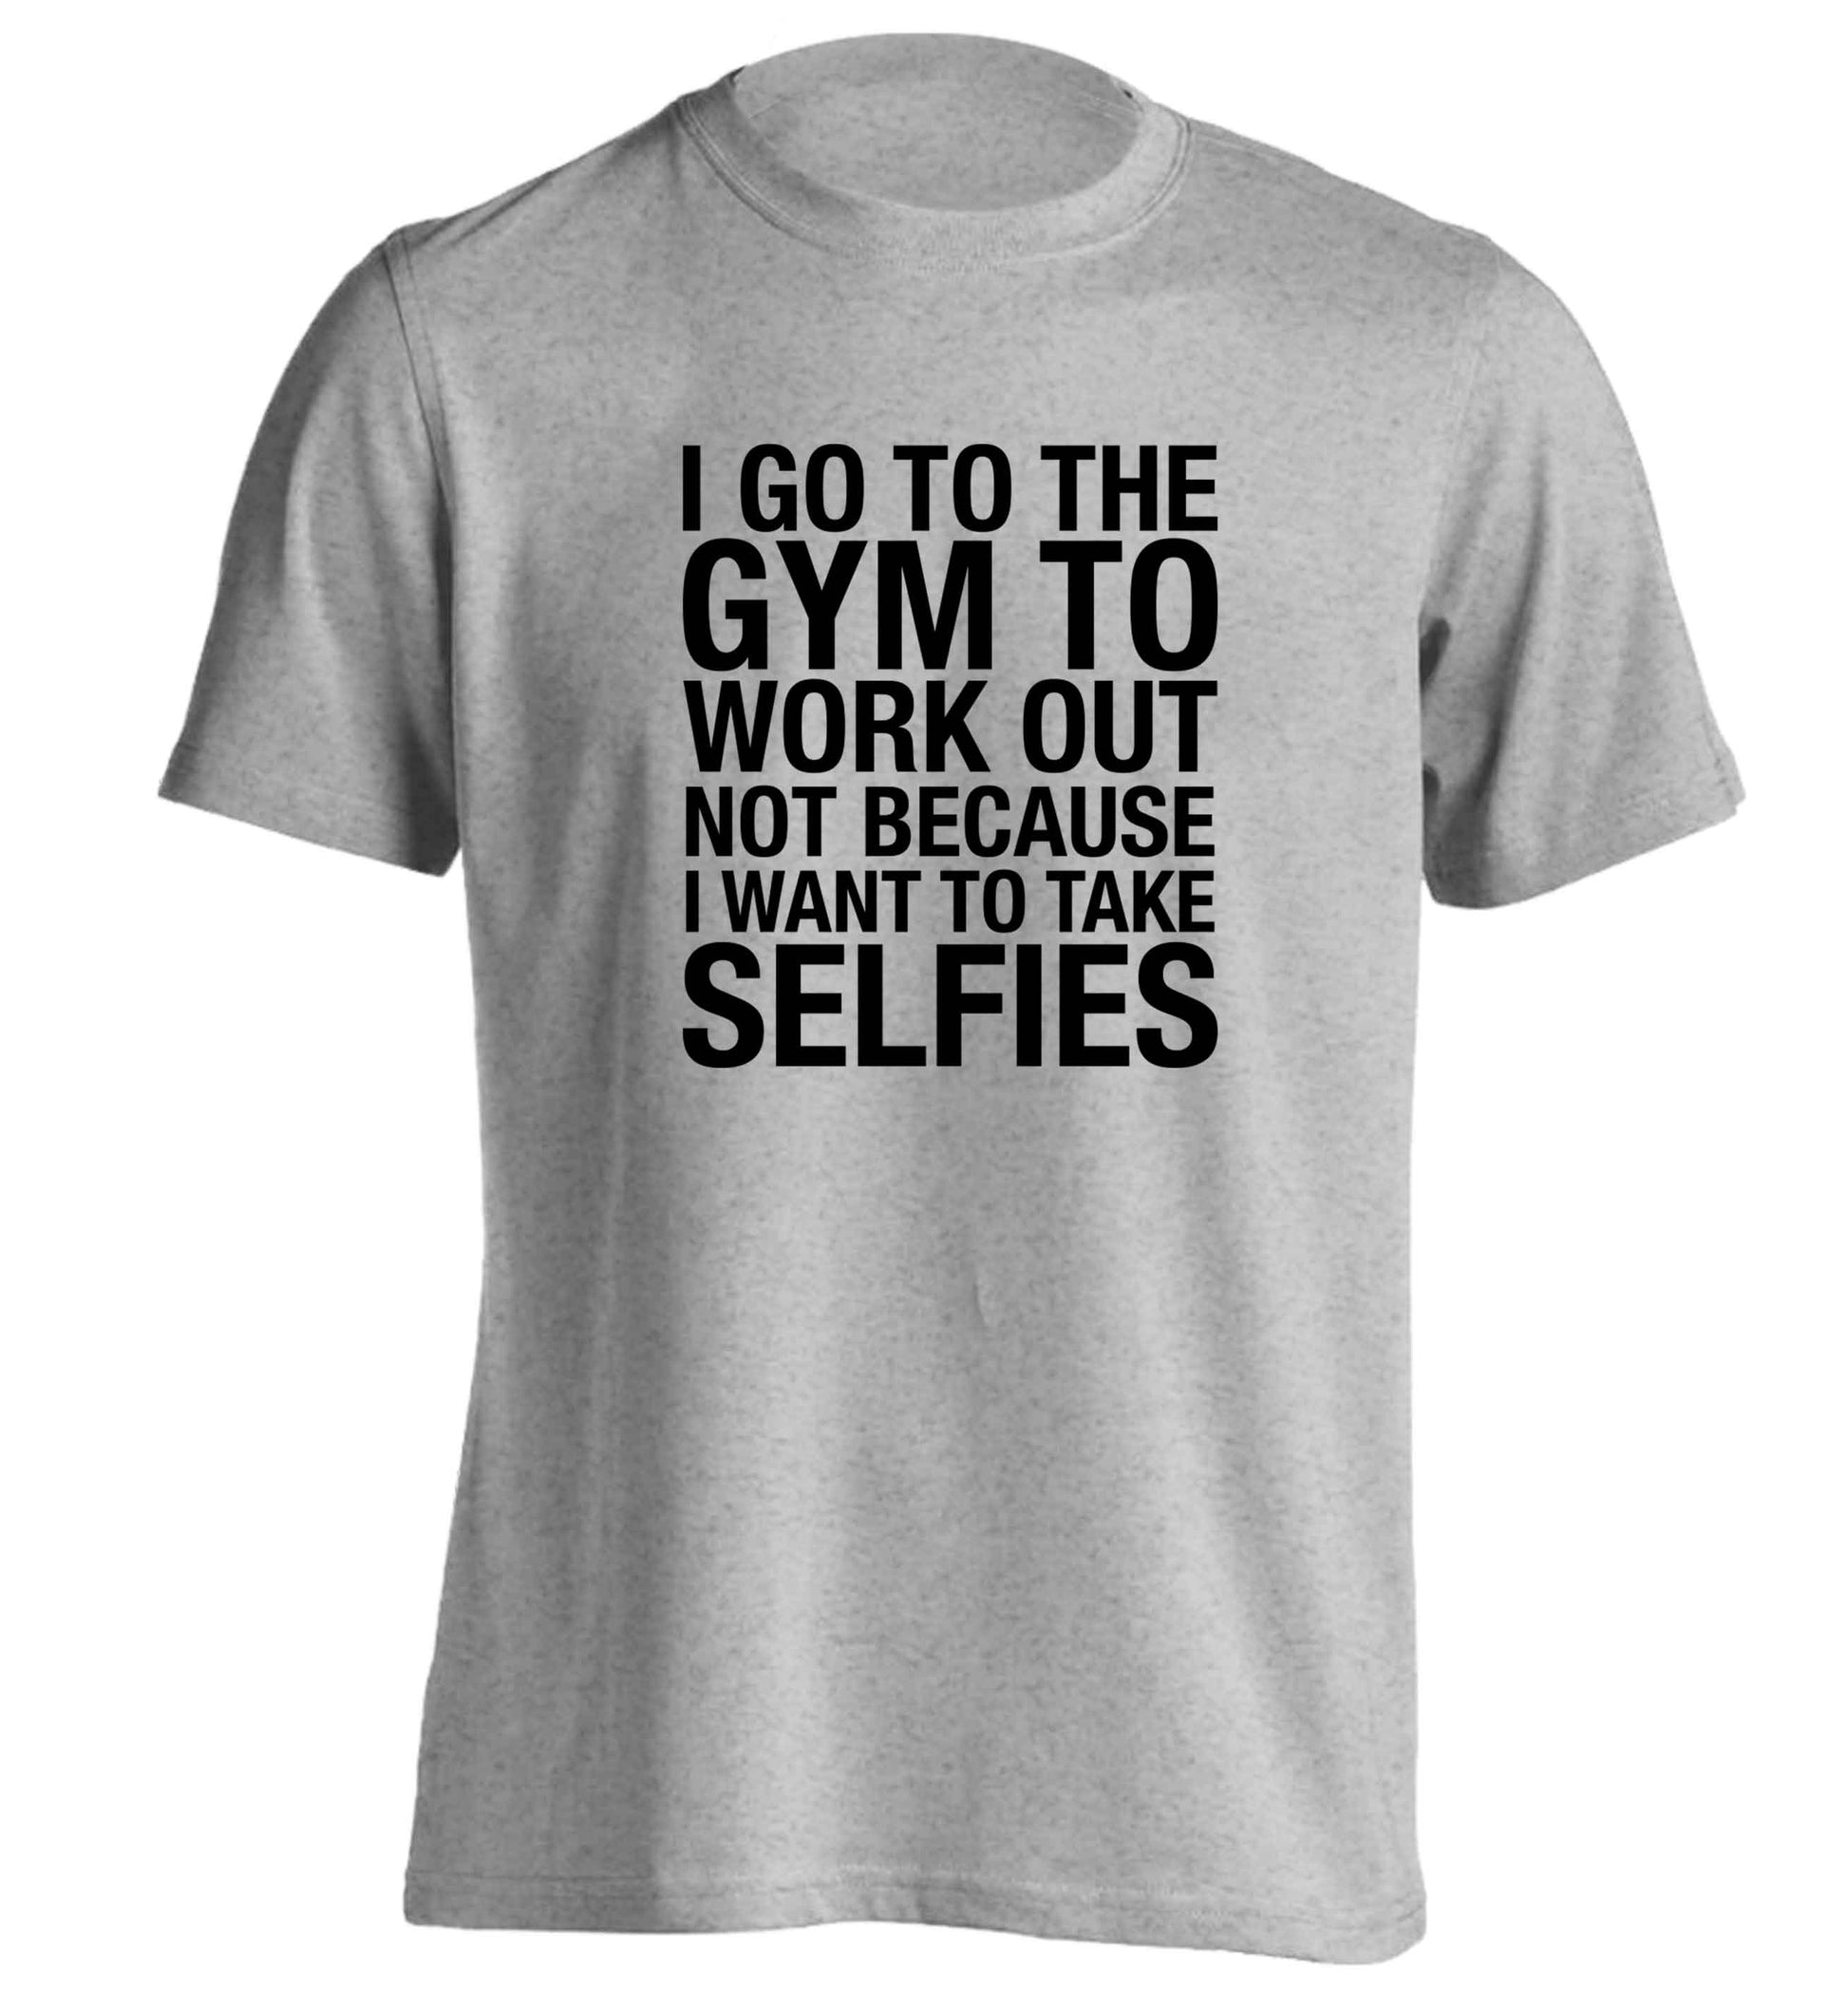 I go to the gym to workout not to take selfies adults unisex grey Tshirt 2XL